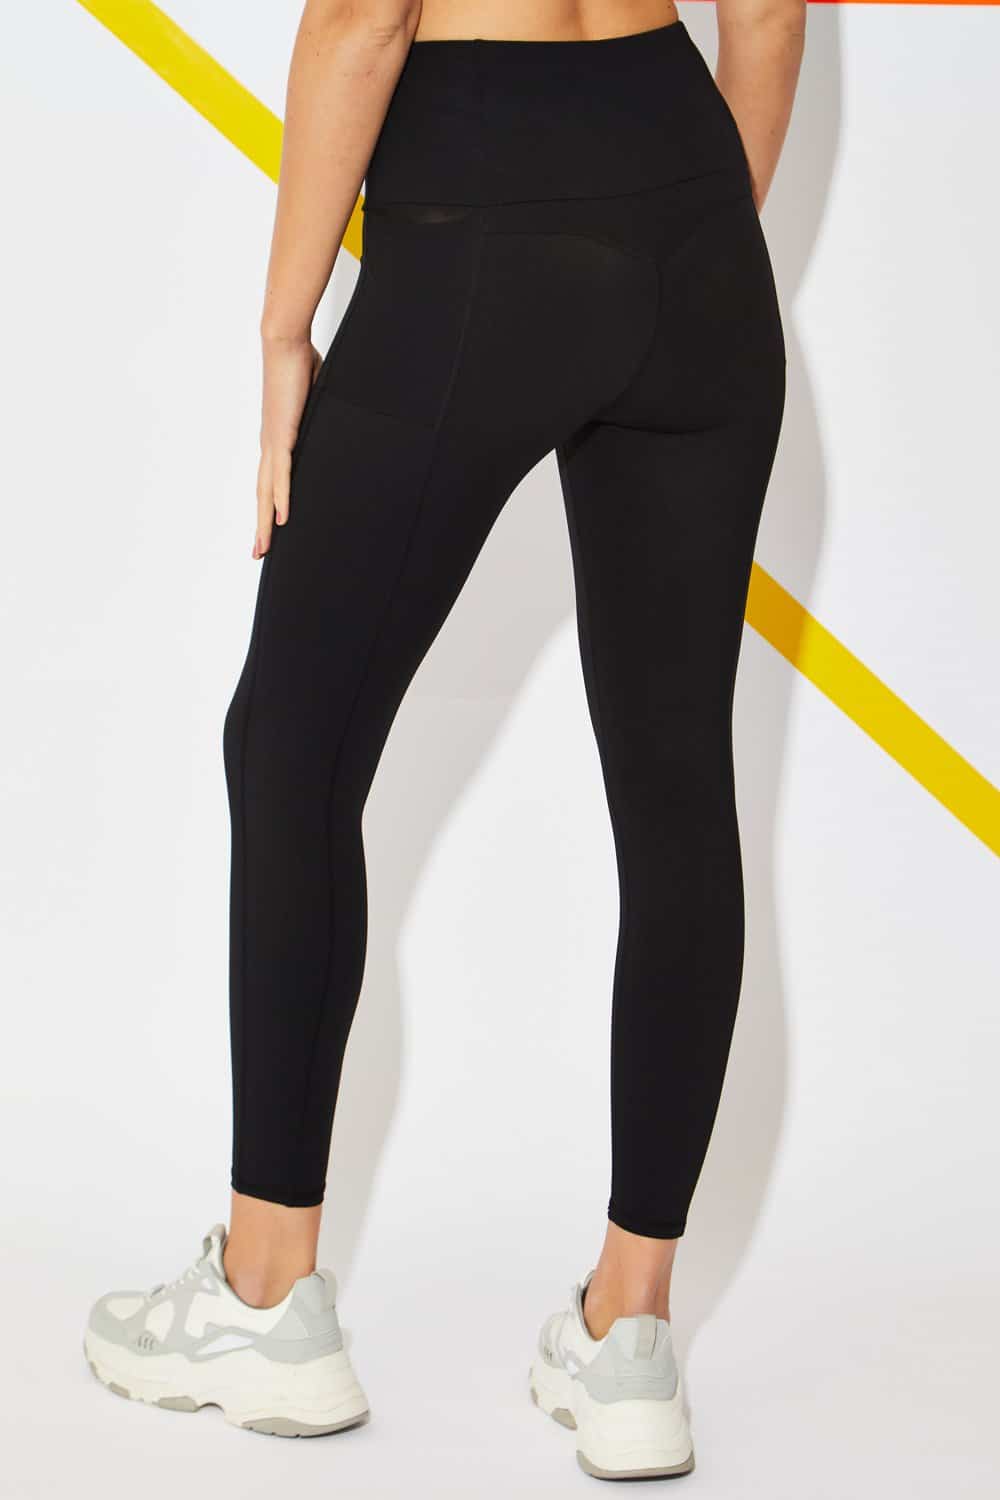 Workout Leggings With Pocket For Phone  International Society of Precision  Agriculture